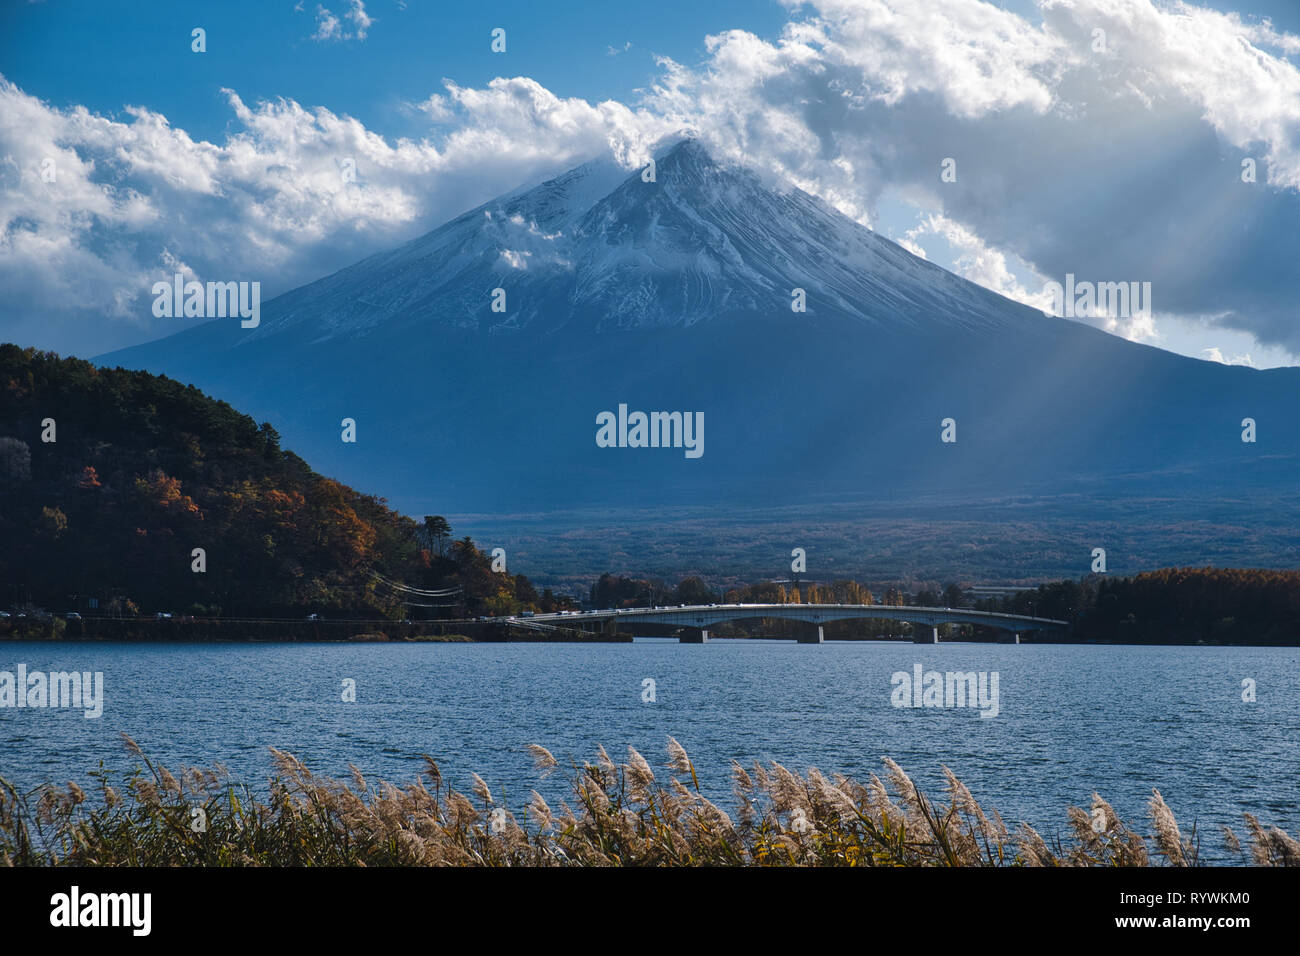 Photo of the Mount Fuji near the sunset time Stock Photo